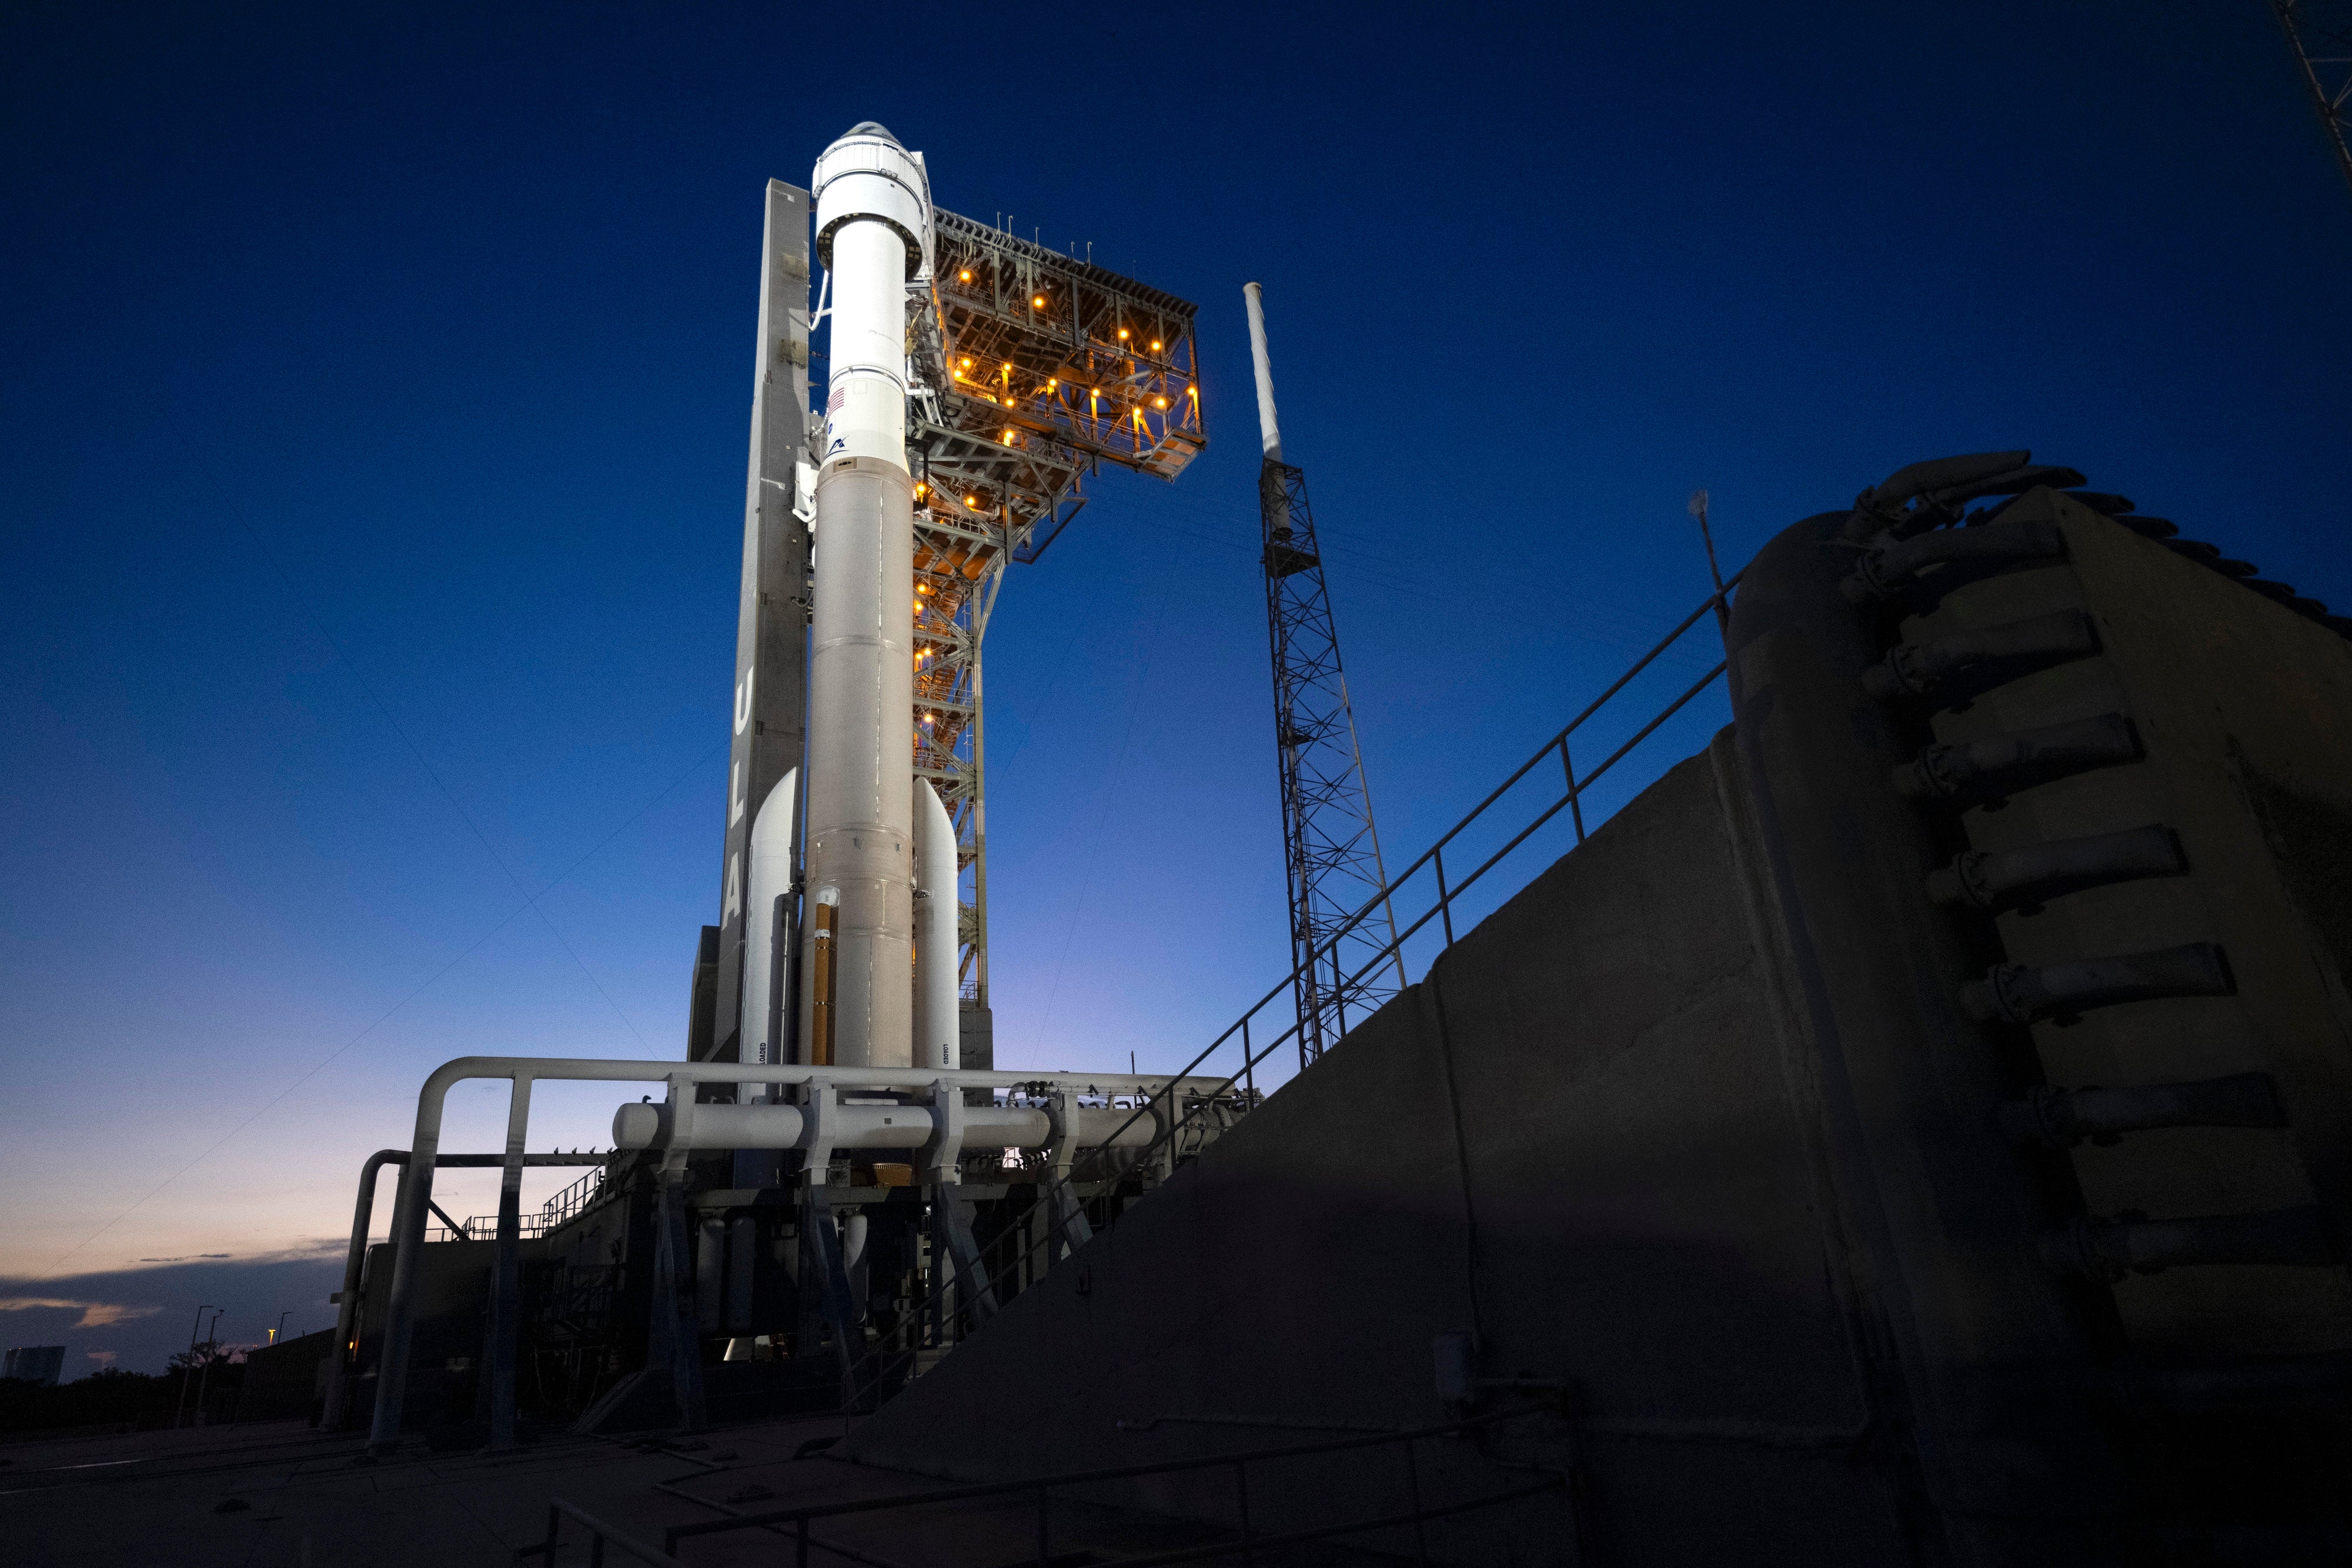 Atlas V rocket with Boeing's CST-100 Starliner spacecraft aboard is seen illuminated by spotlights on the launch pad at Space Launch Complex 41 ahead of the NASA's Boeing Crew Flight Test on May 4, 2024 at Cape Canaveral Space Force Station in Florida.